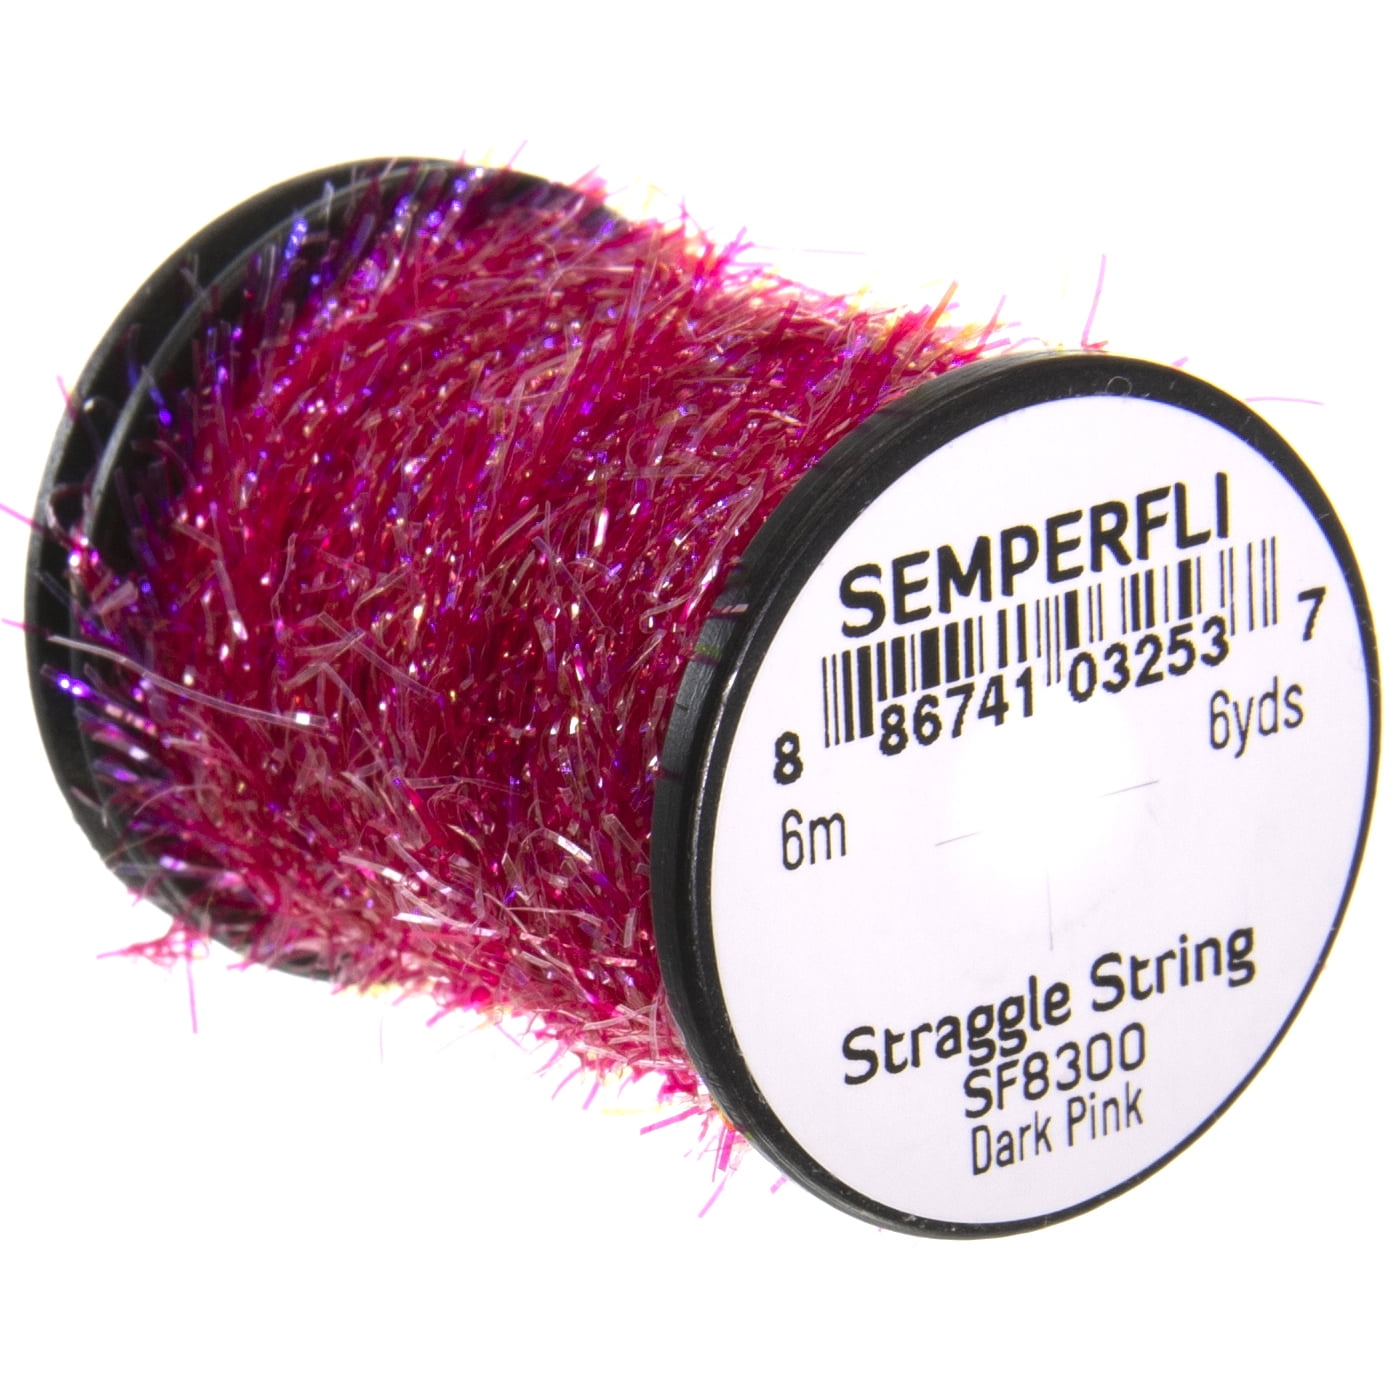 SEMPERFLI STRAGGLE STRING MICRO CHENILLE CRAFT AND FLY TYING THINNEST CHENILE 